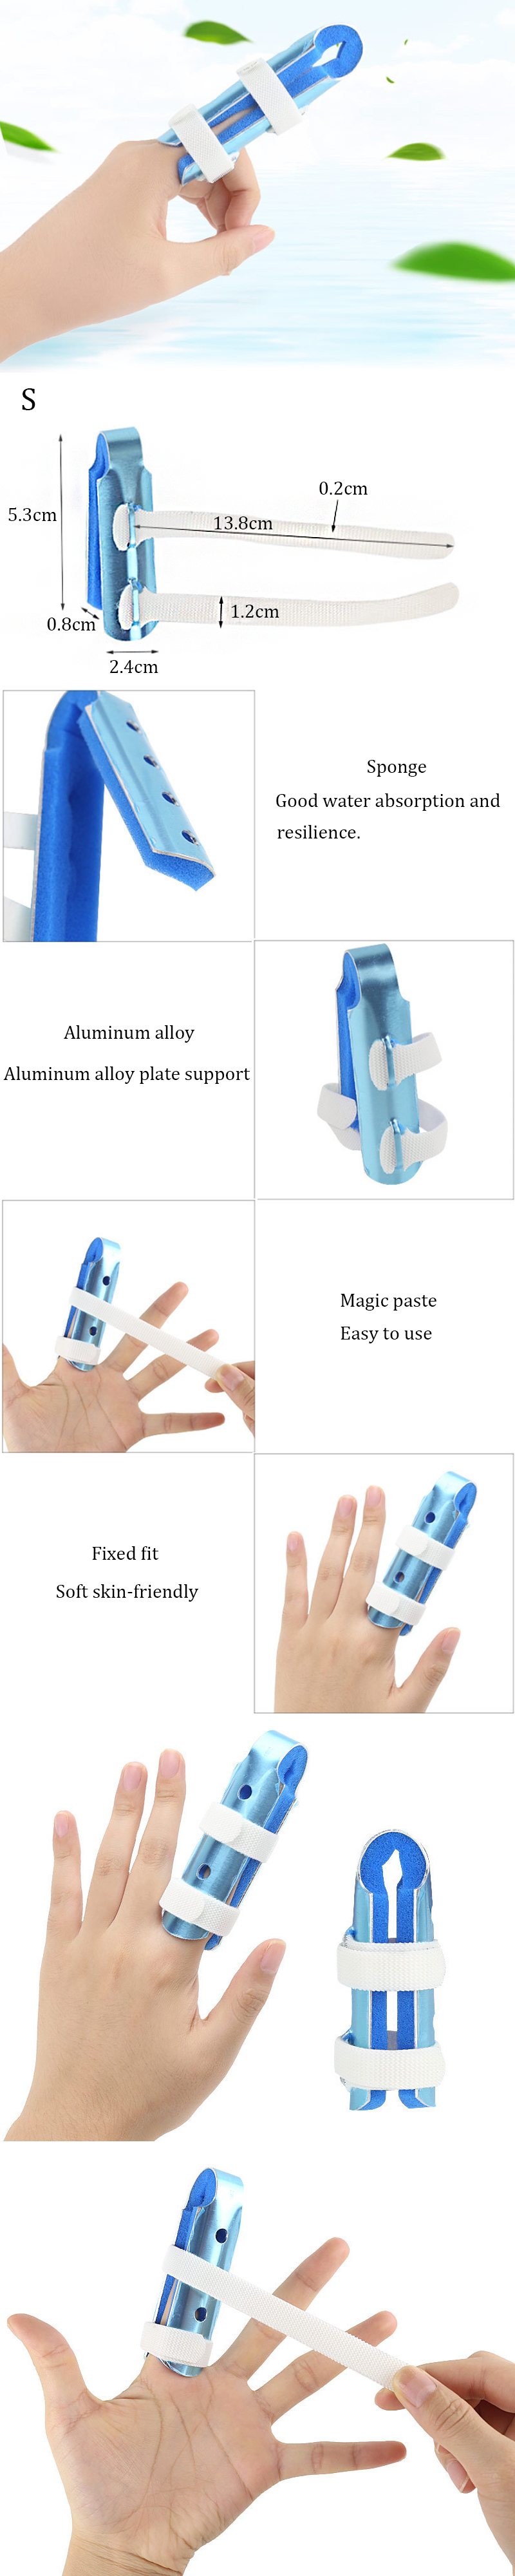 1-Pcs-Finger-Plywood-Finger-Support-Finger-Orthosis-Finger-Fracture-Fixed-Protective-Gear-1408365-1